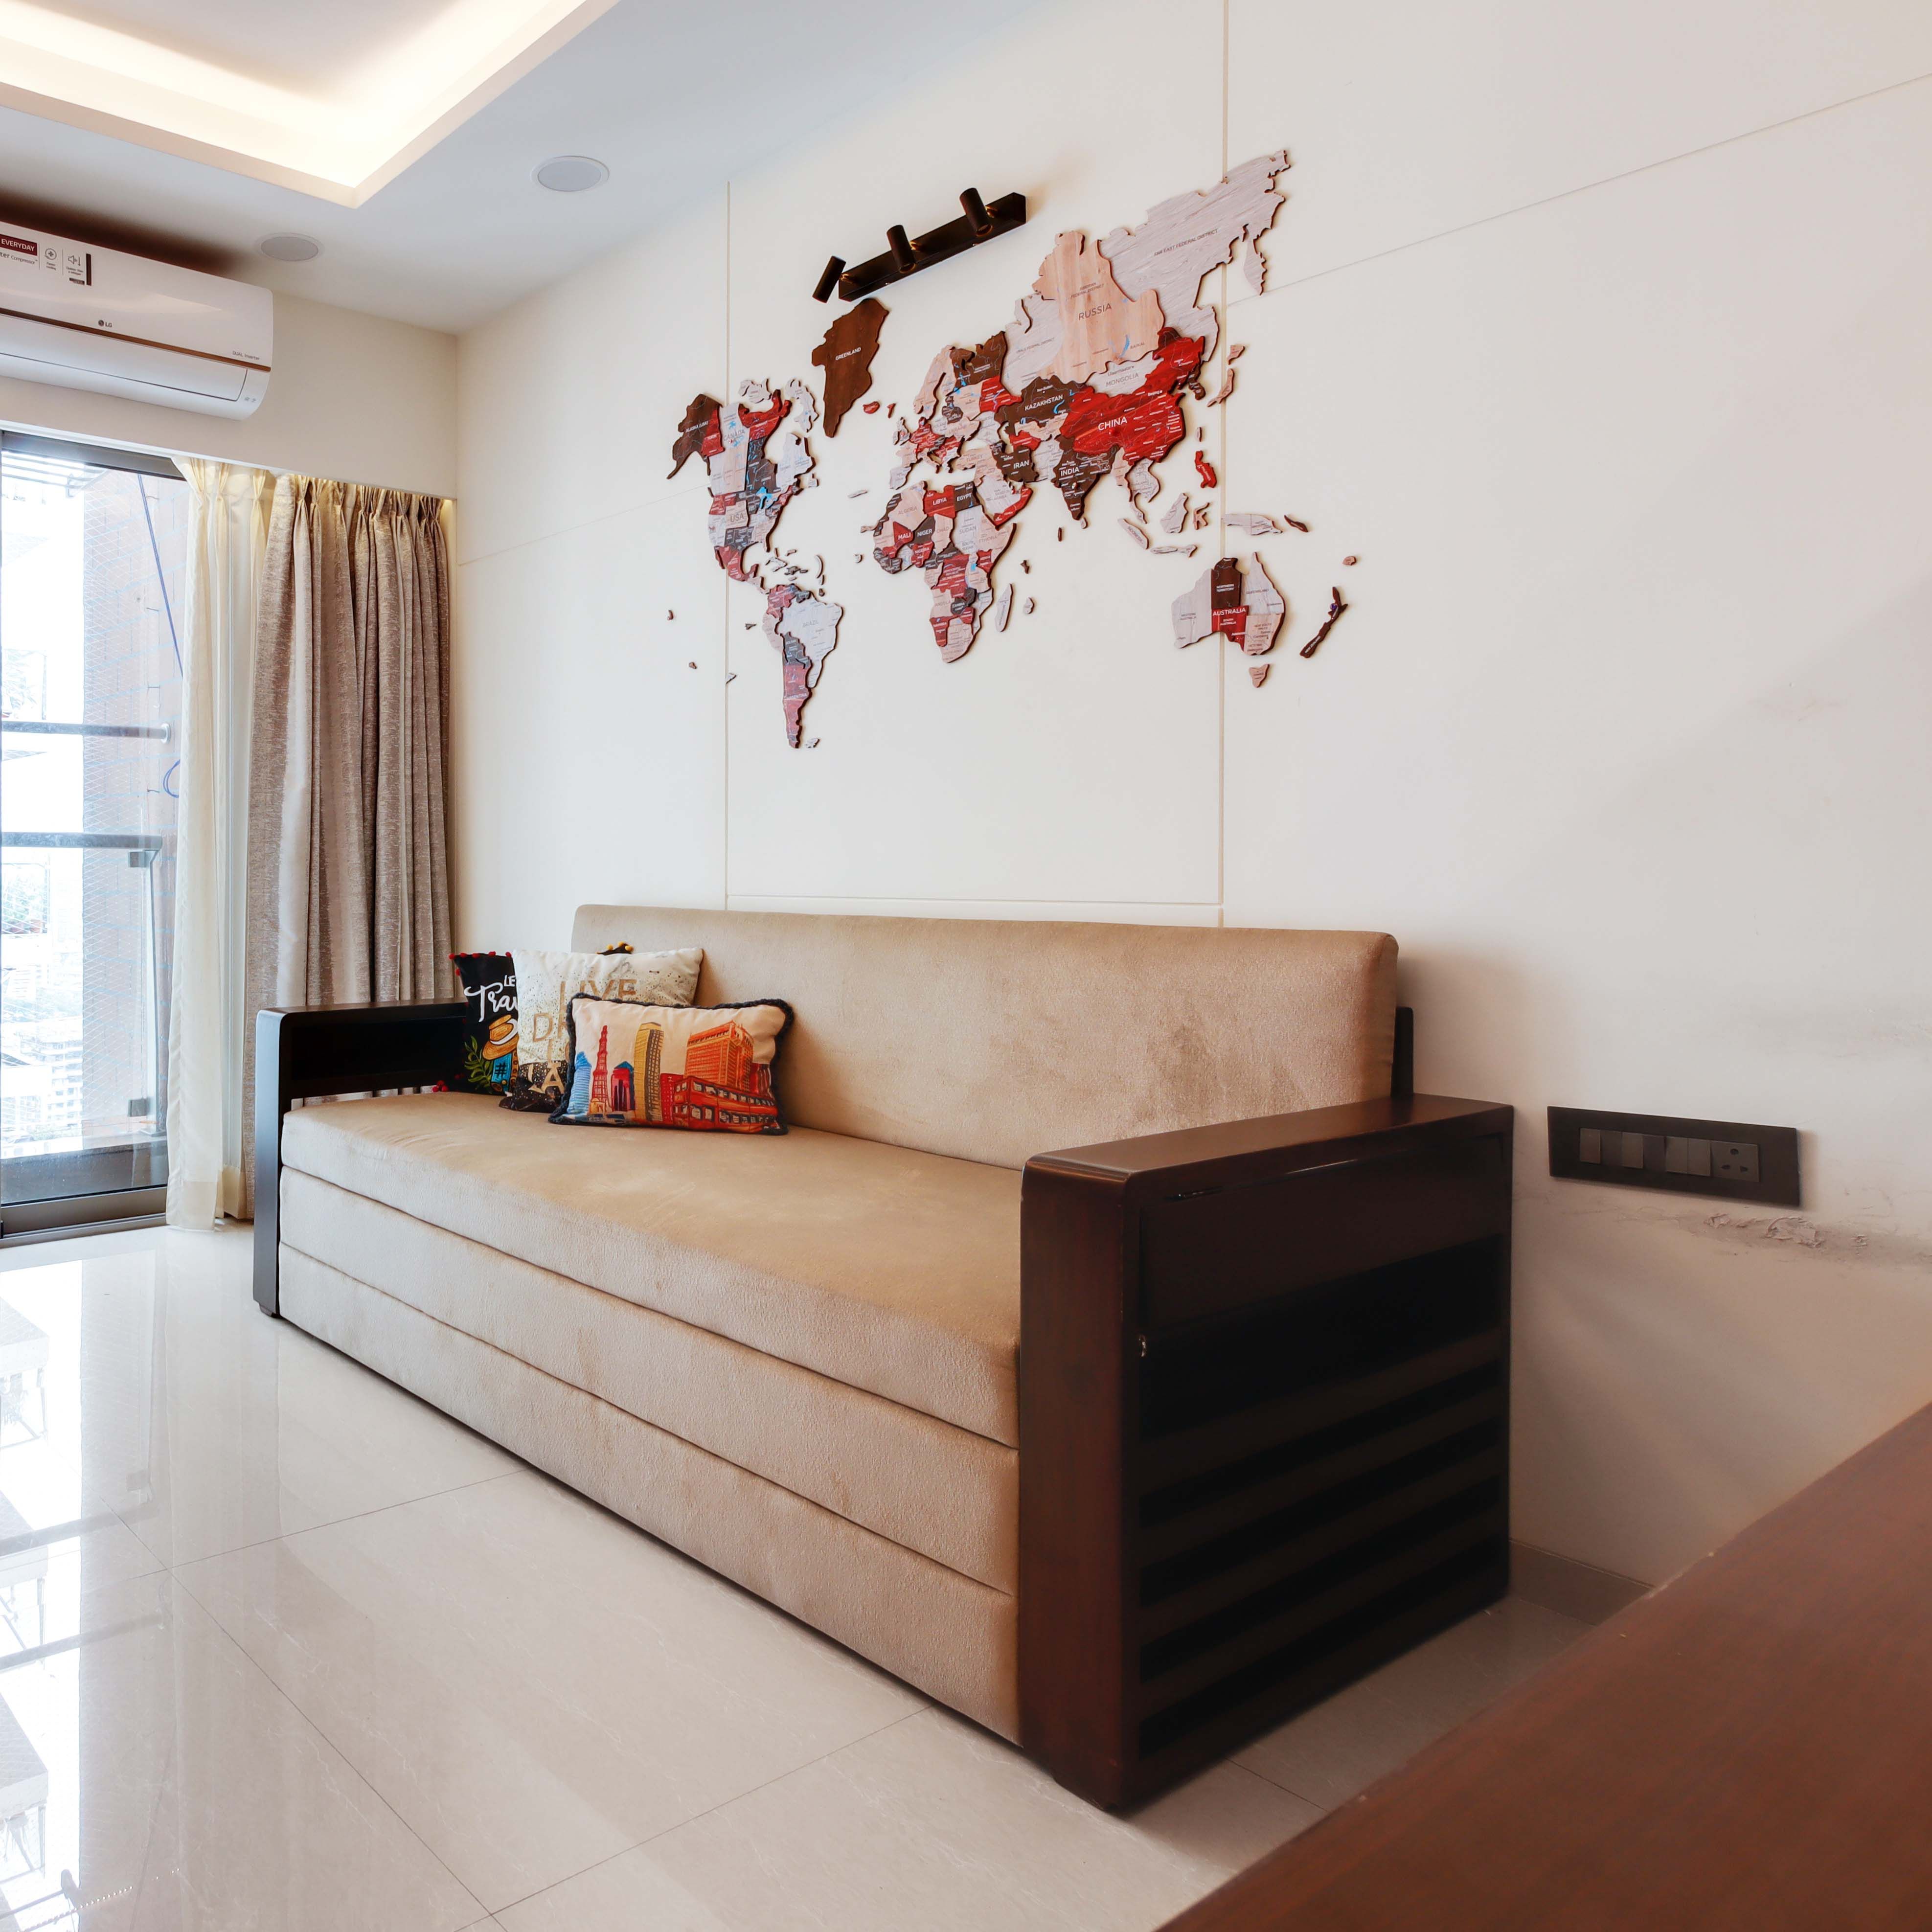 Modern Living Room Wall Design With World Map Stencil